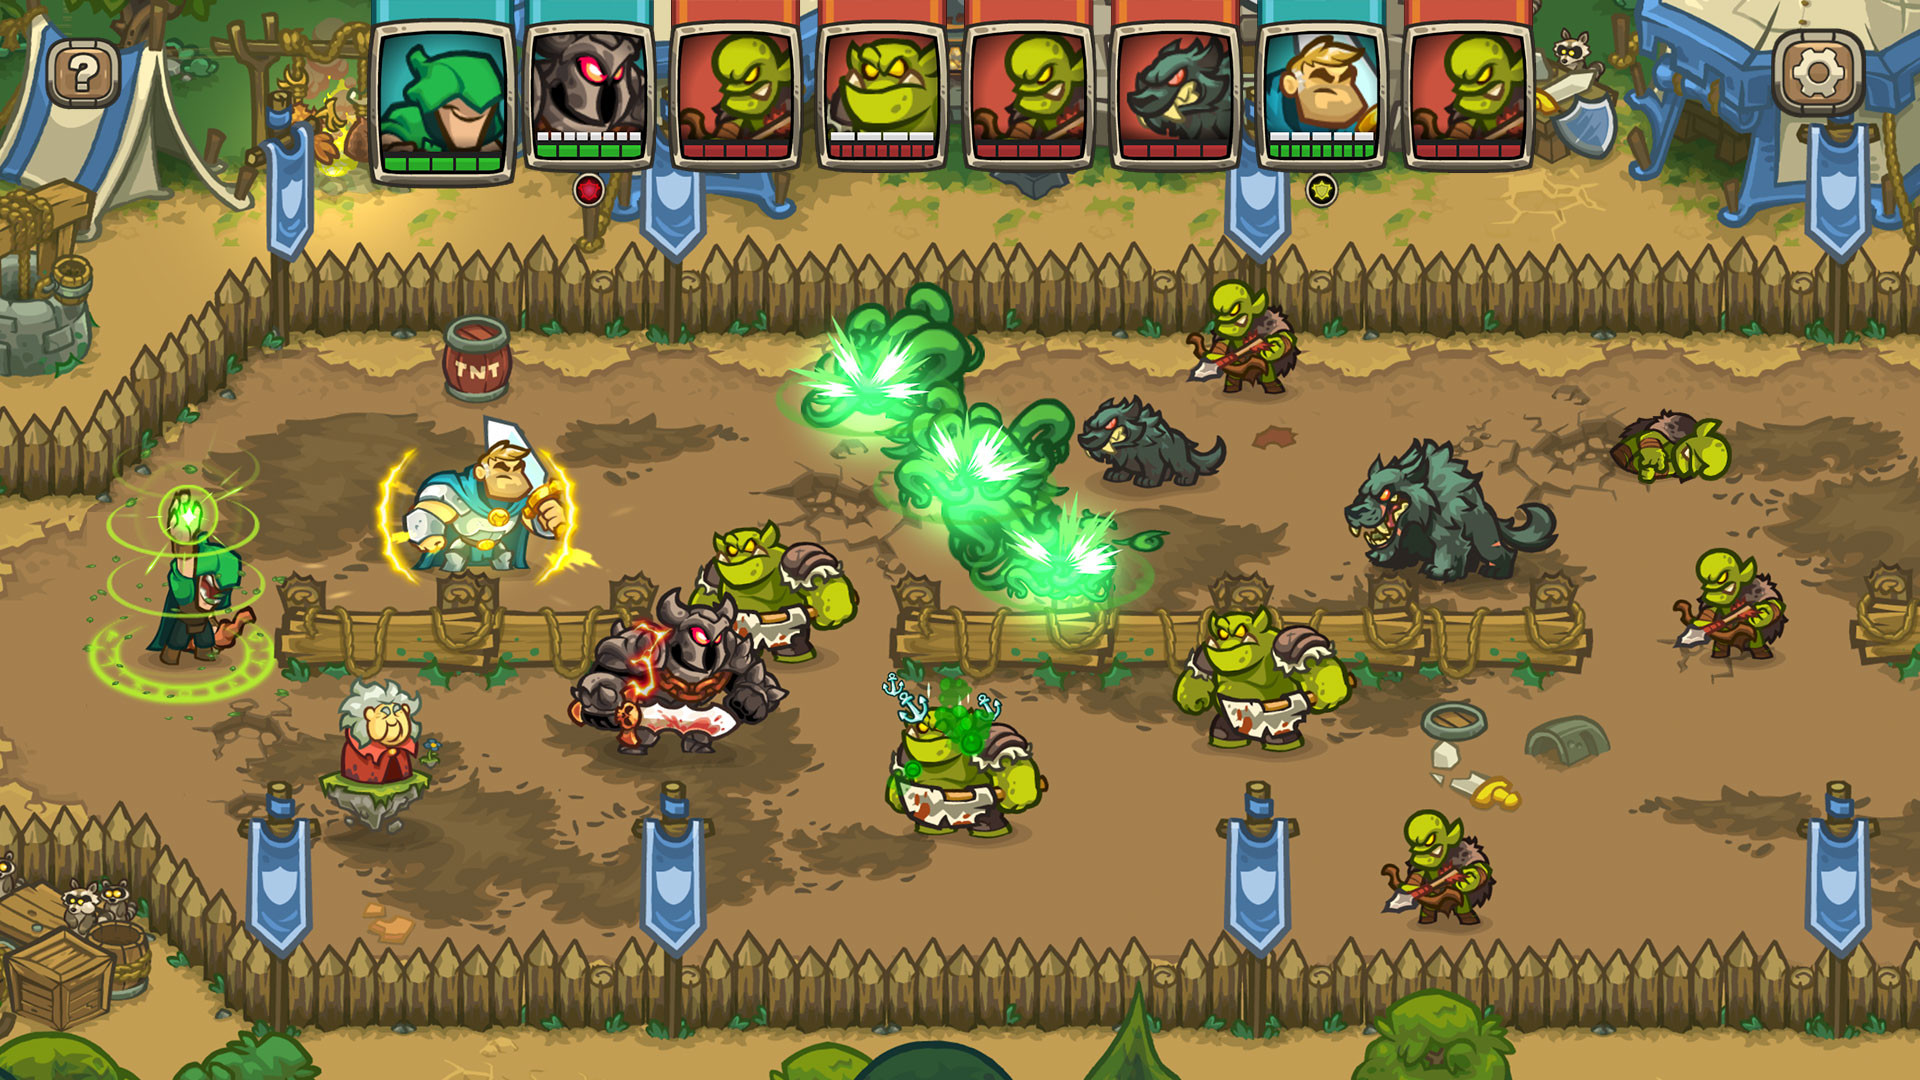 Review — Legends of Kingdom Rush. Embark on an epic journey through the…, by Stims